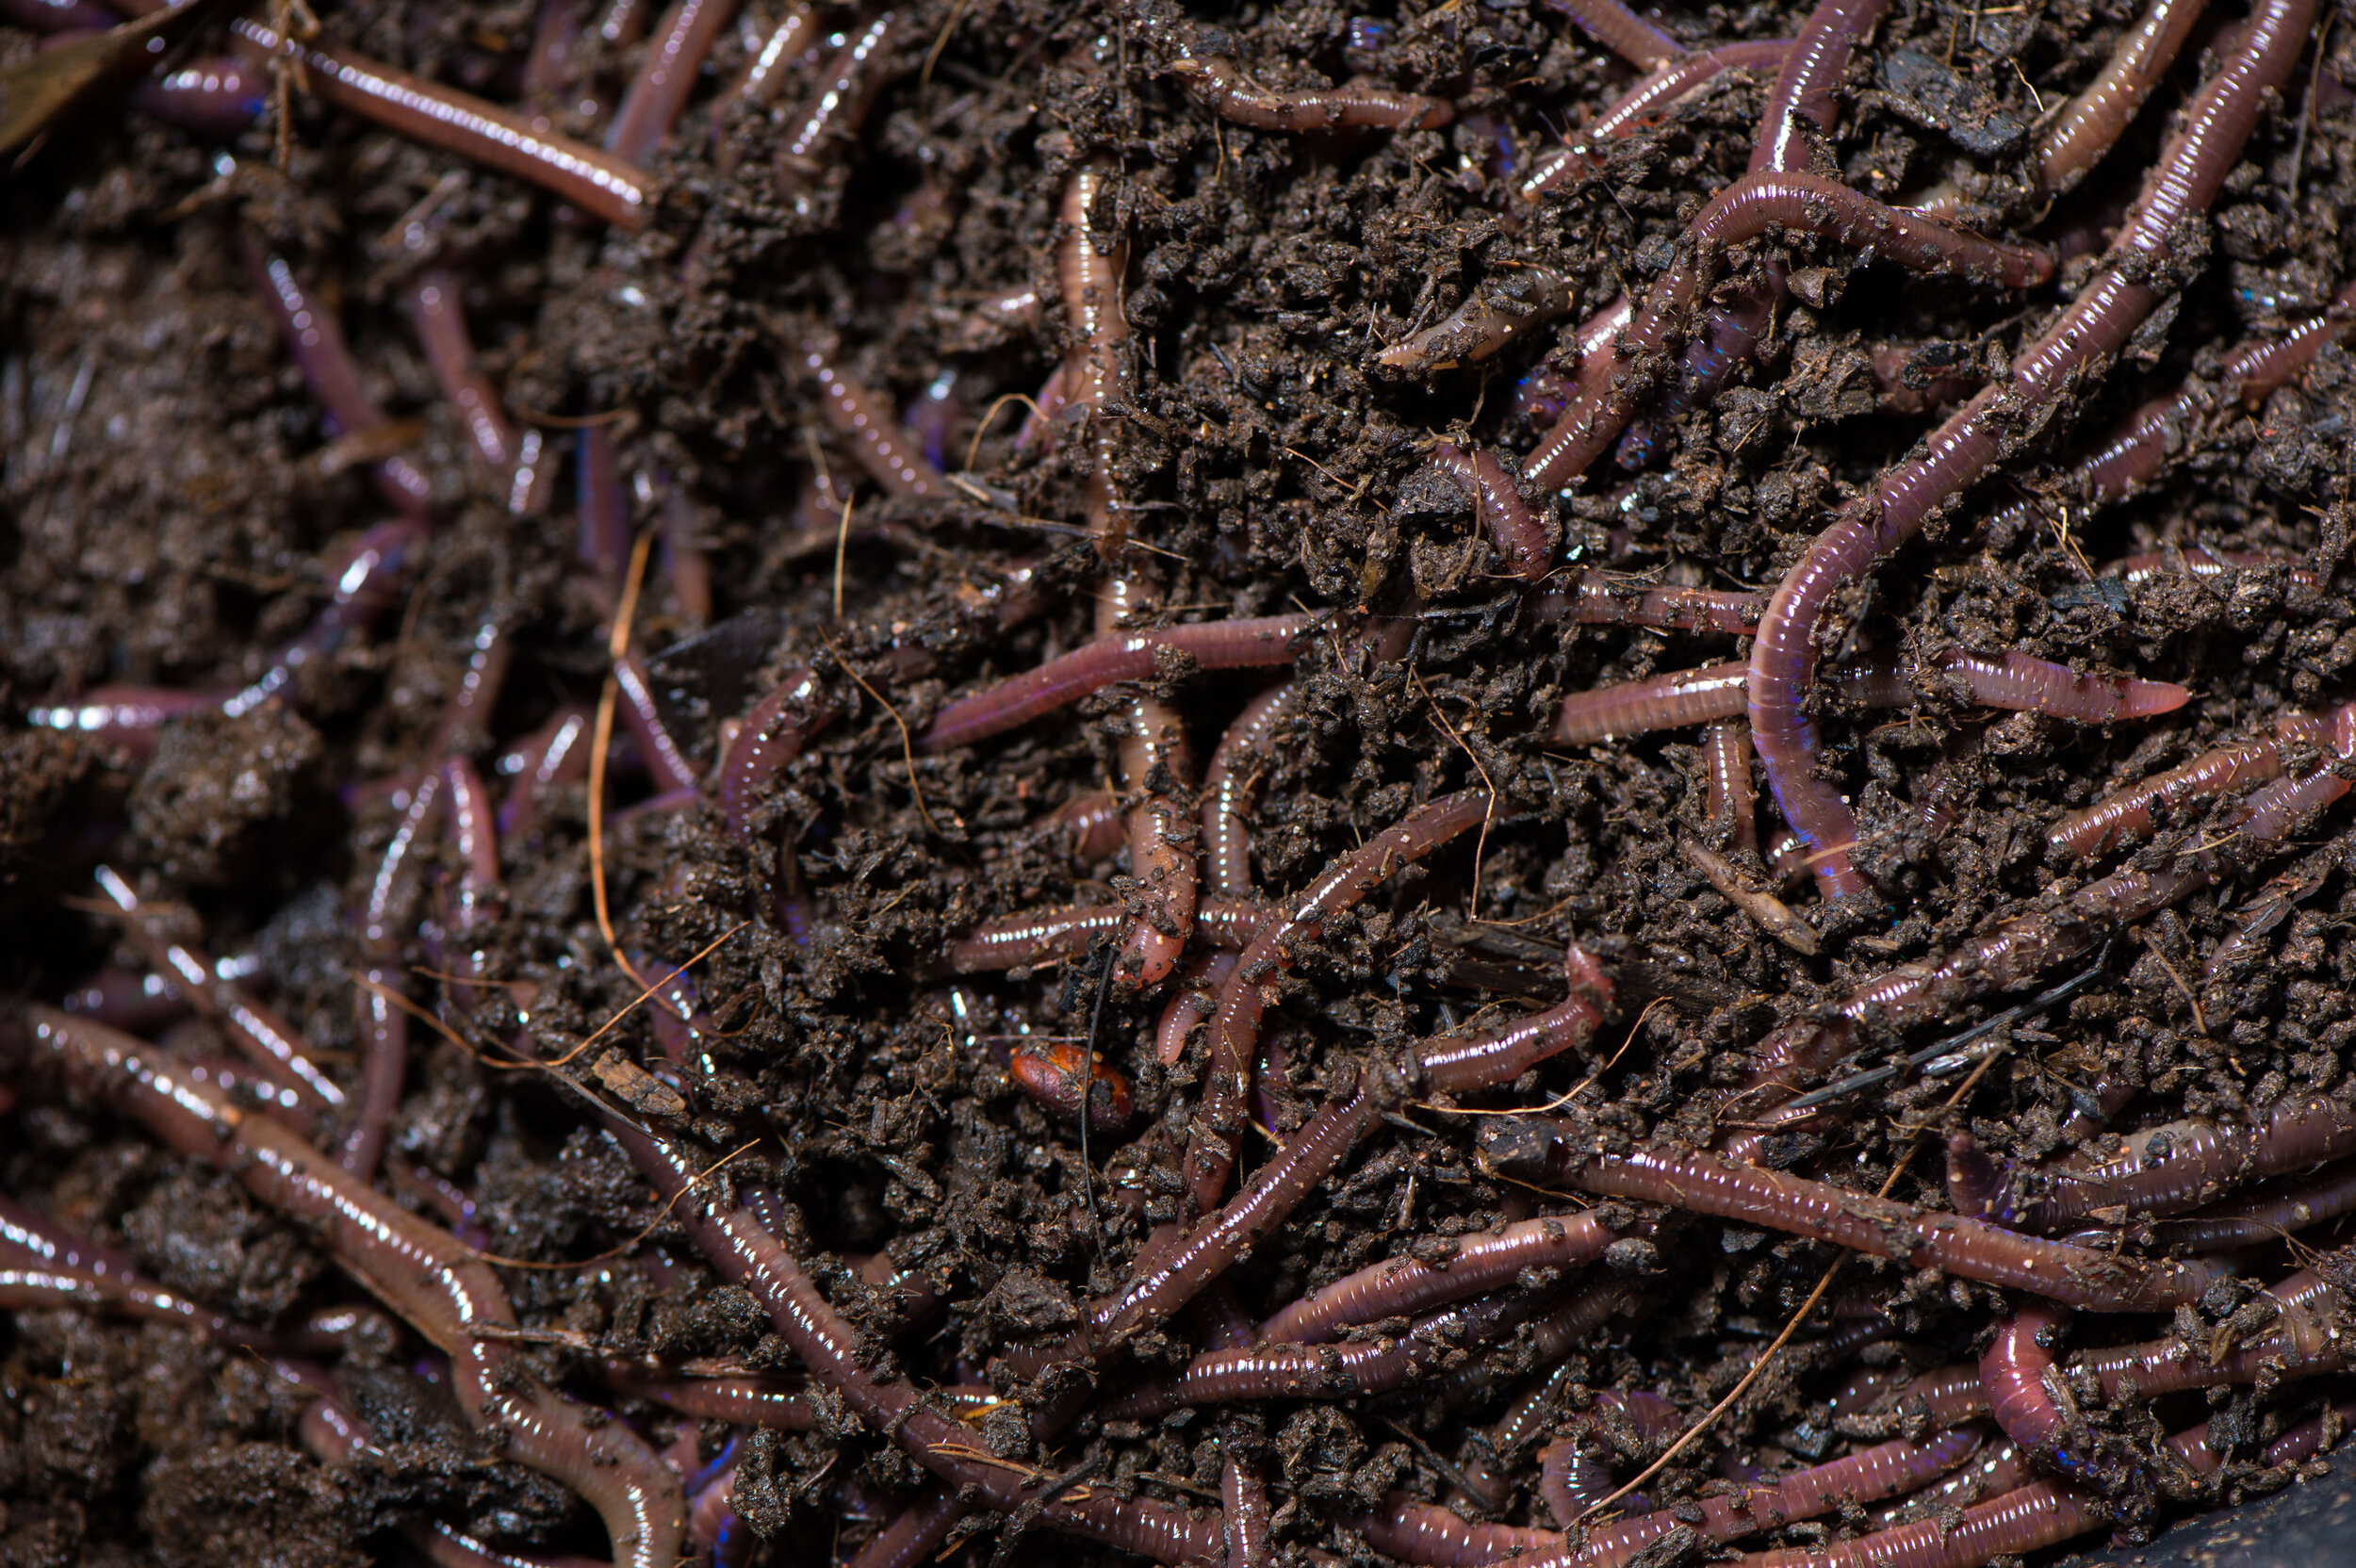 Image of A close-up of vermicompost